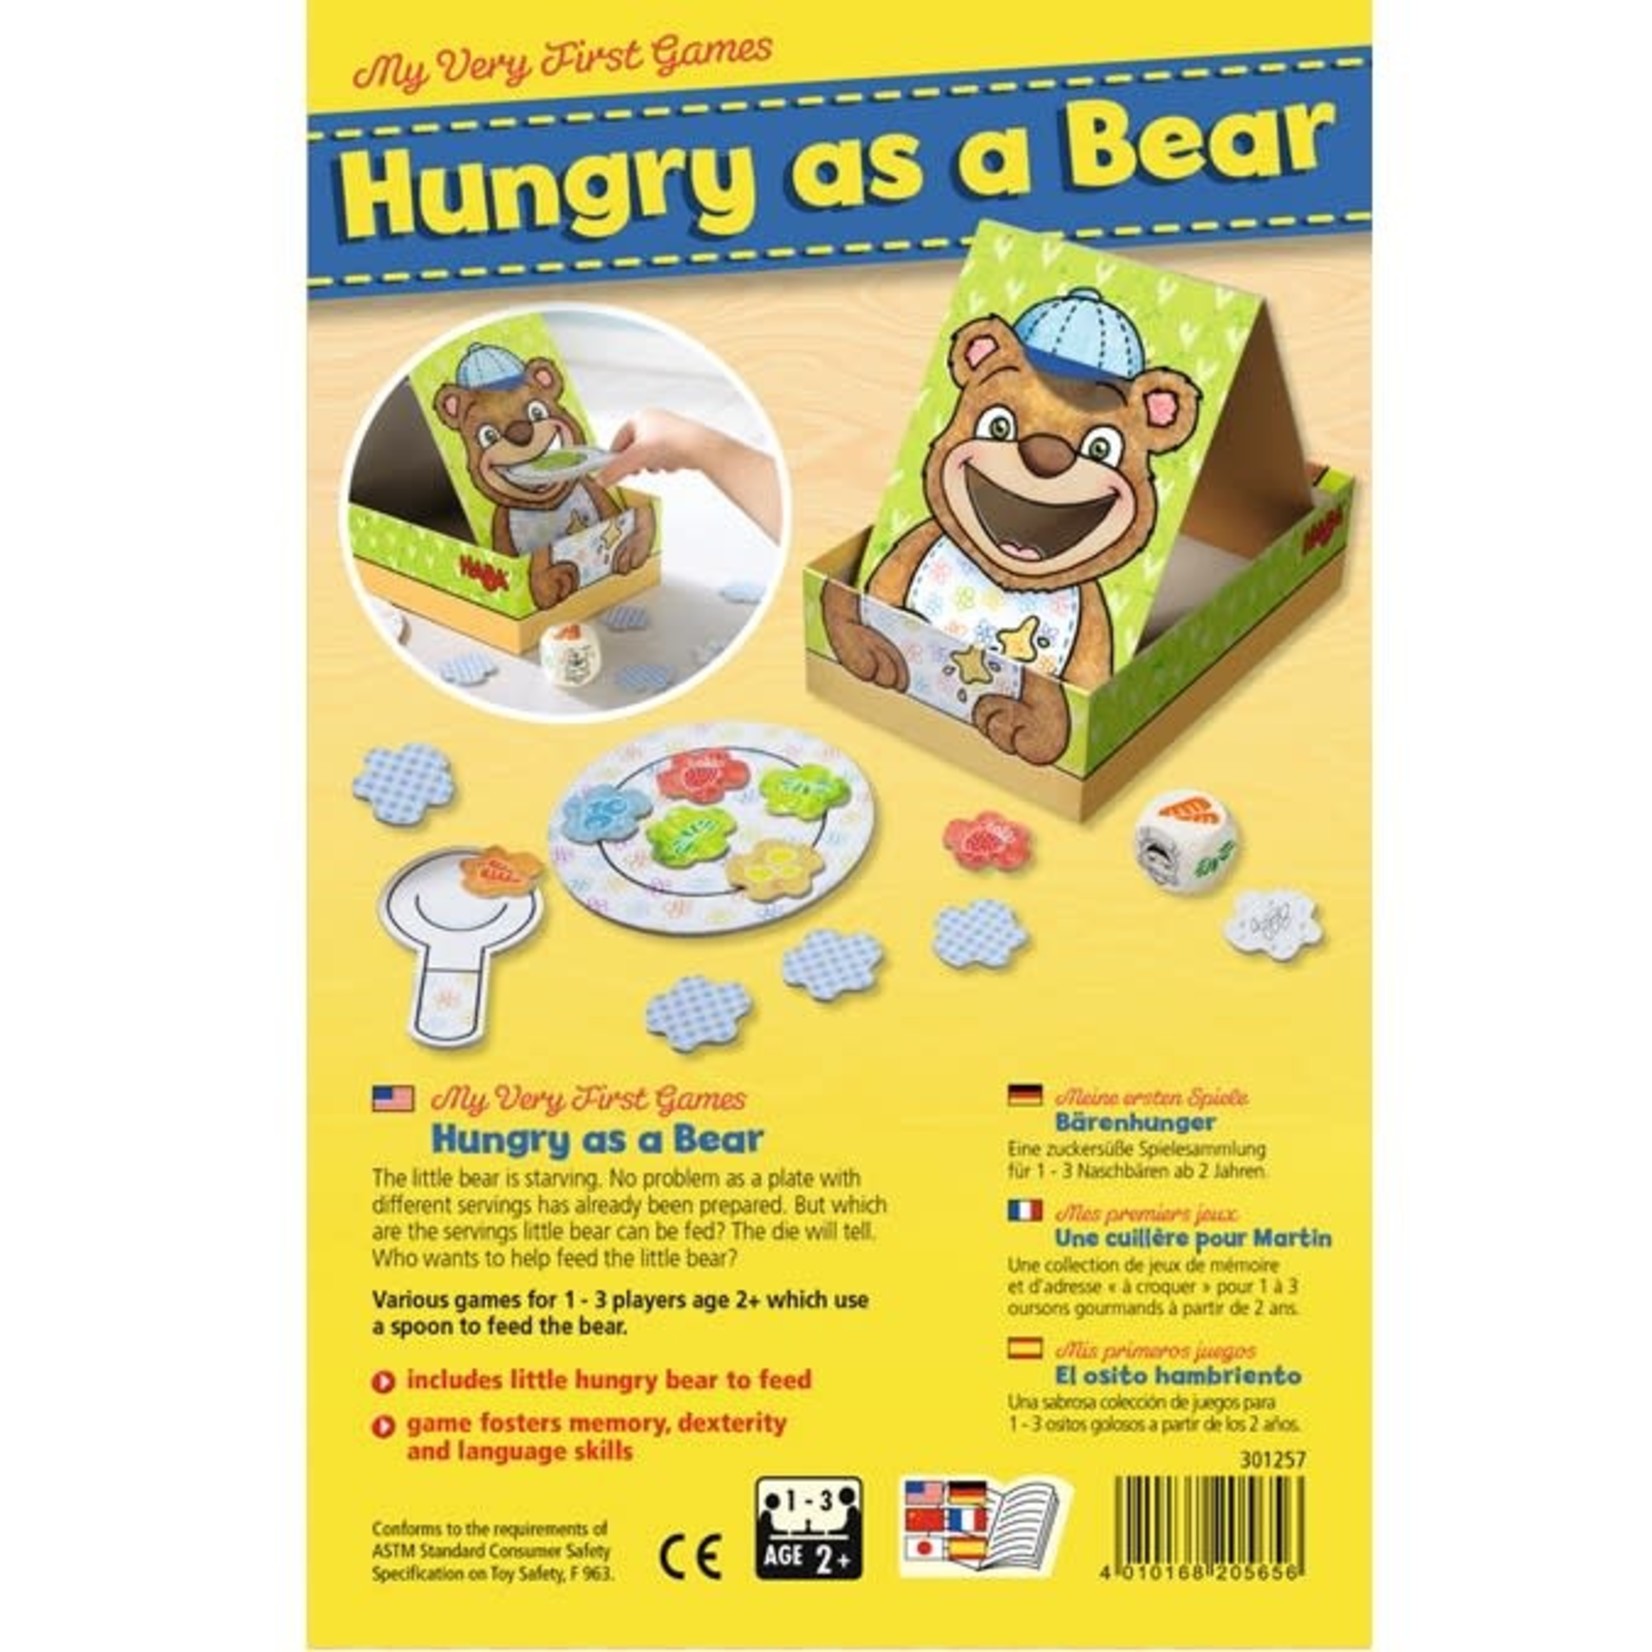 HABA My Very First Games - Hungry As A Bear